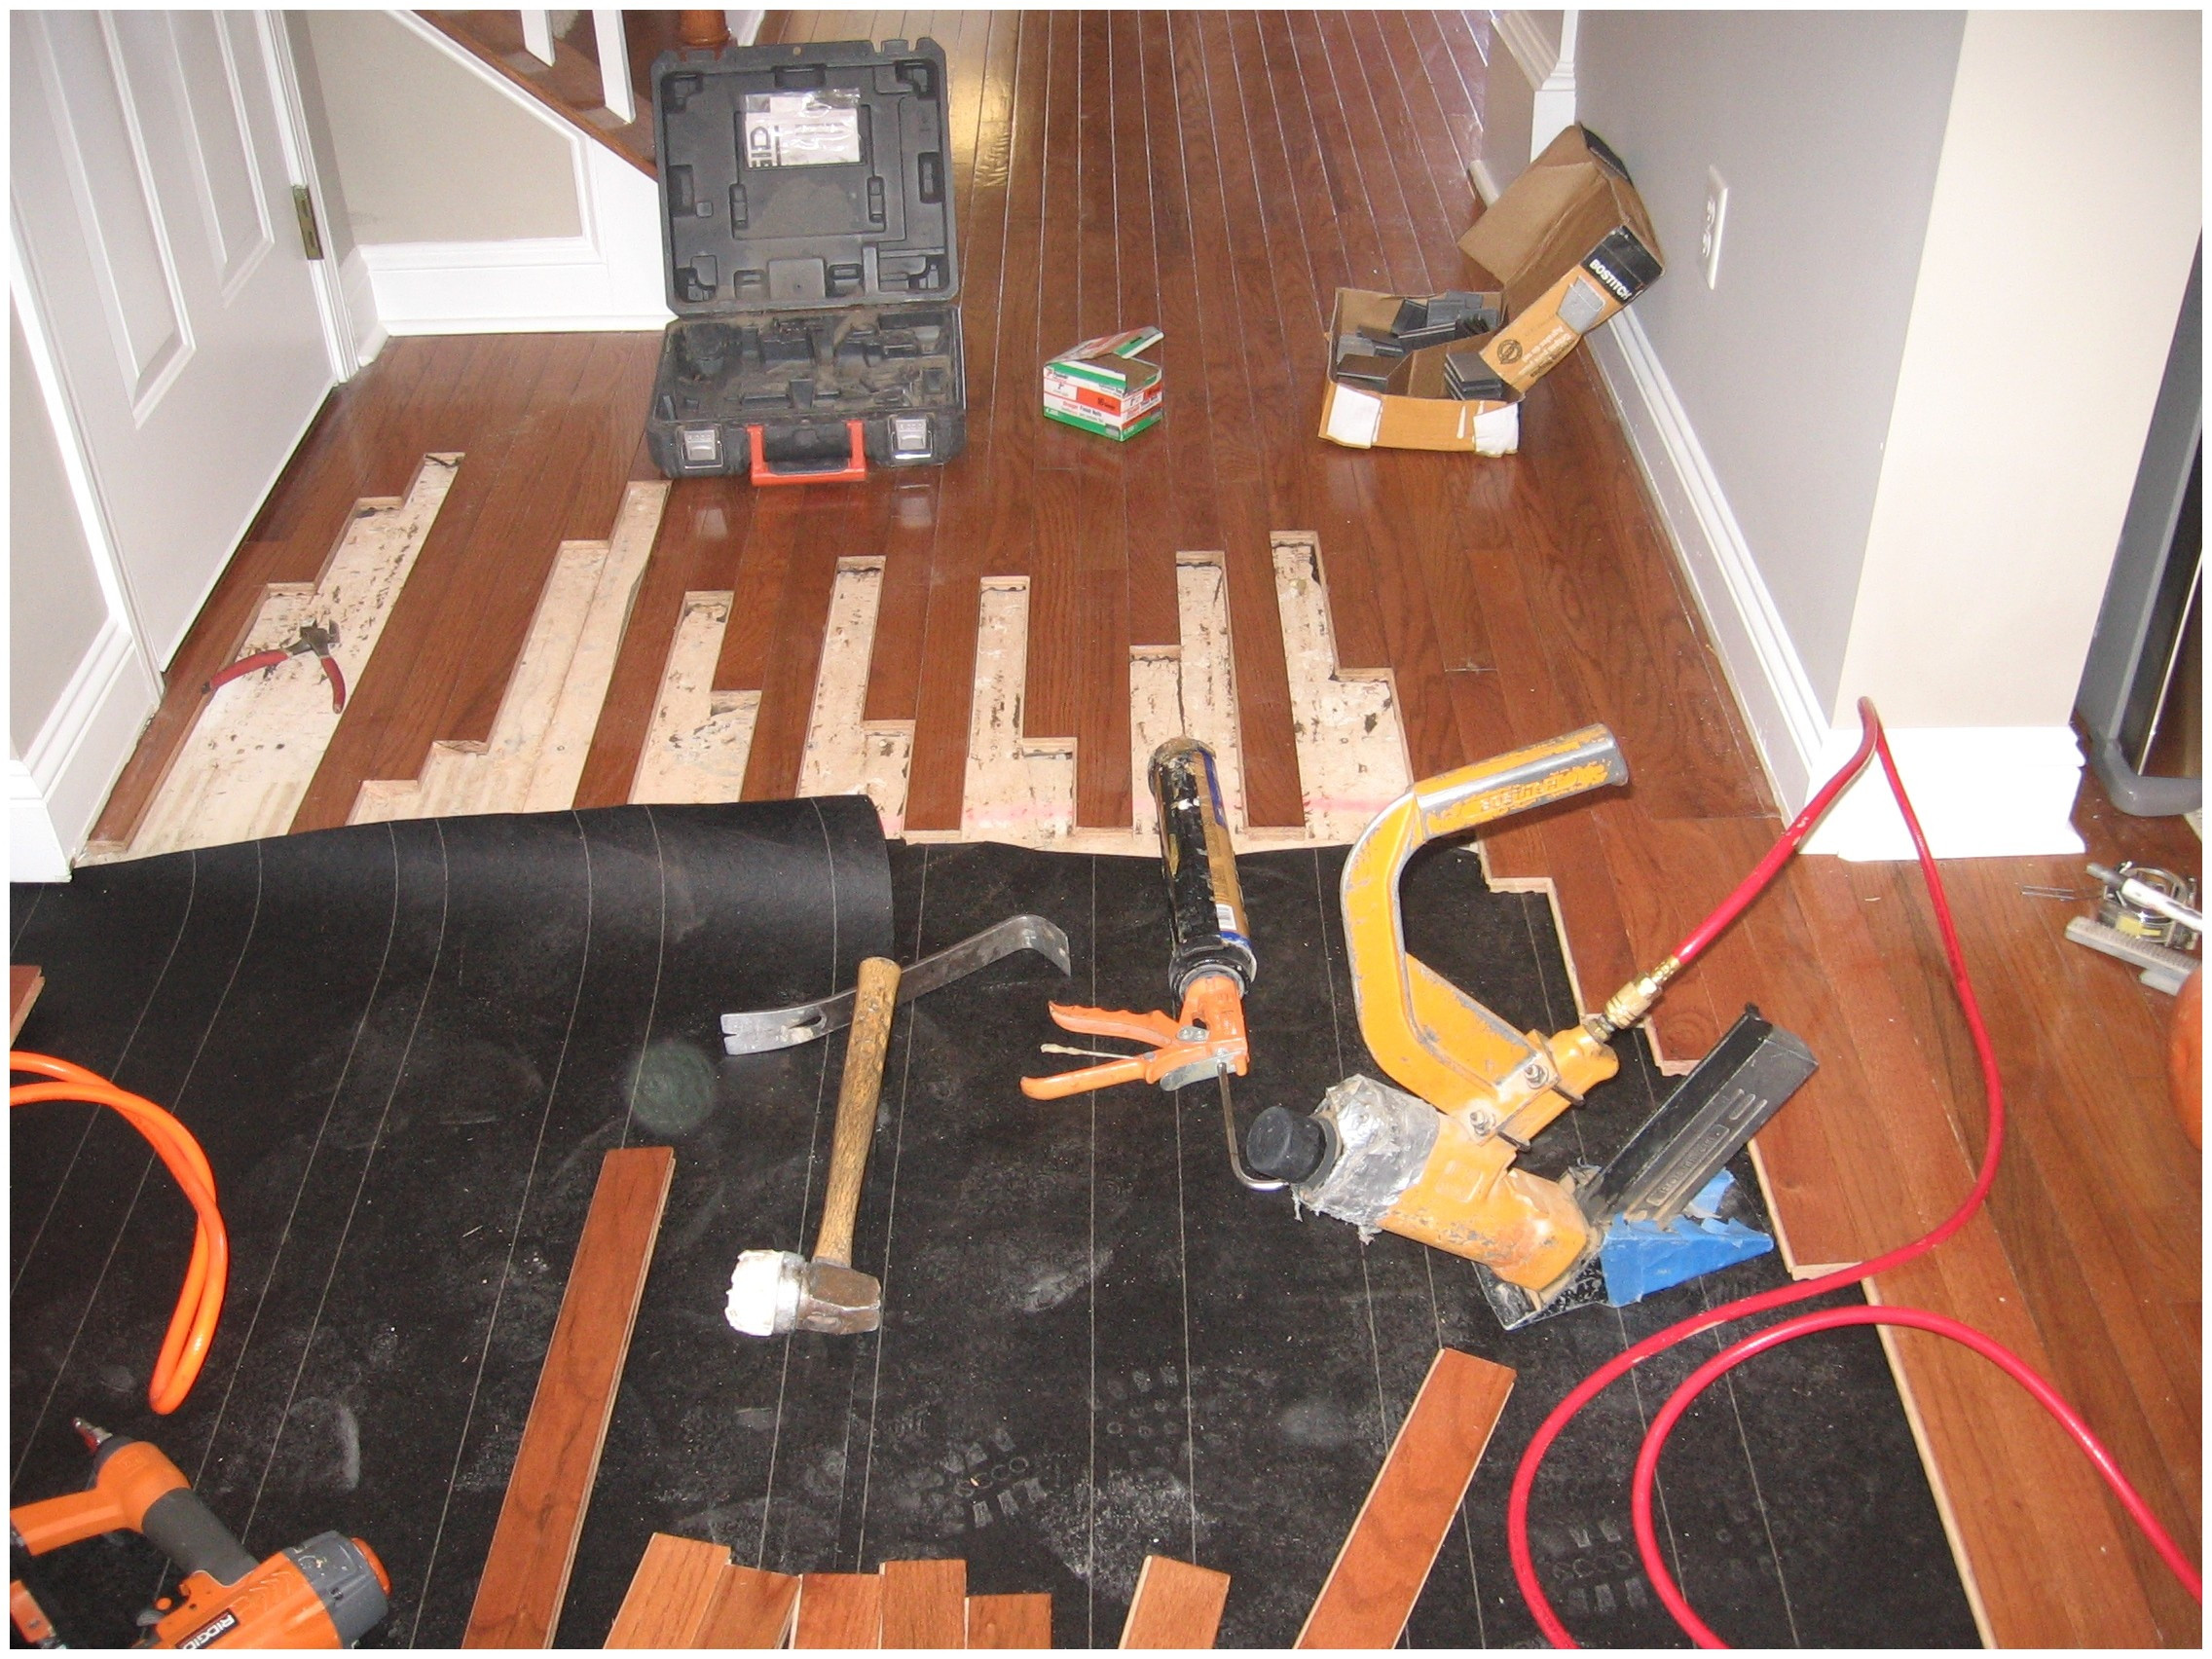 how to nail down hardwood flooring